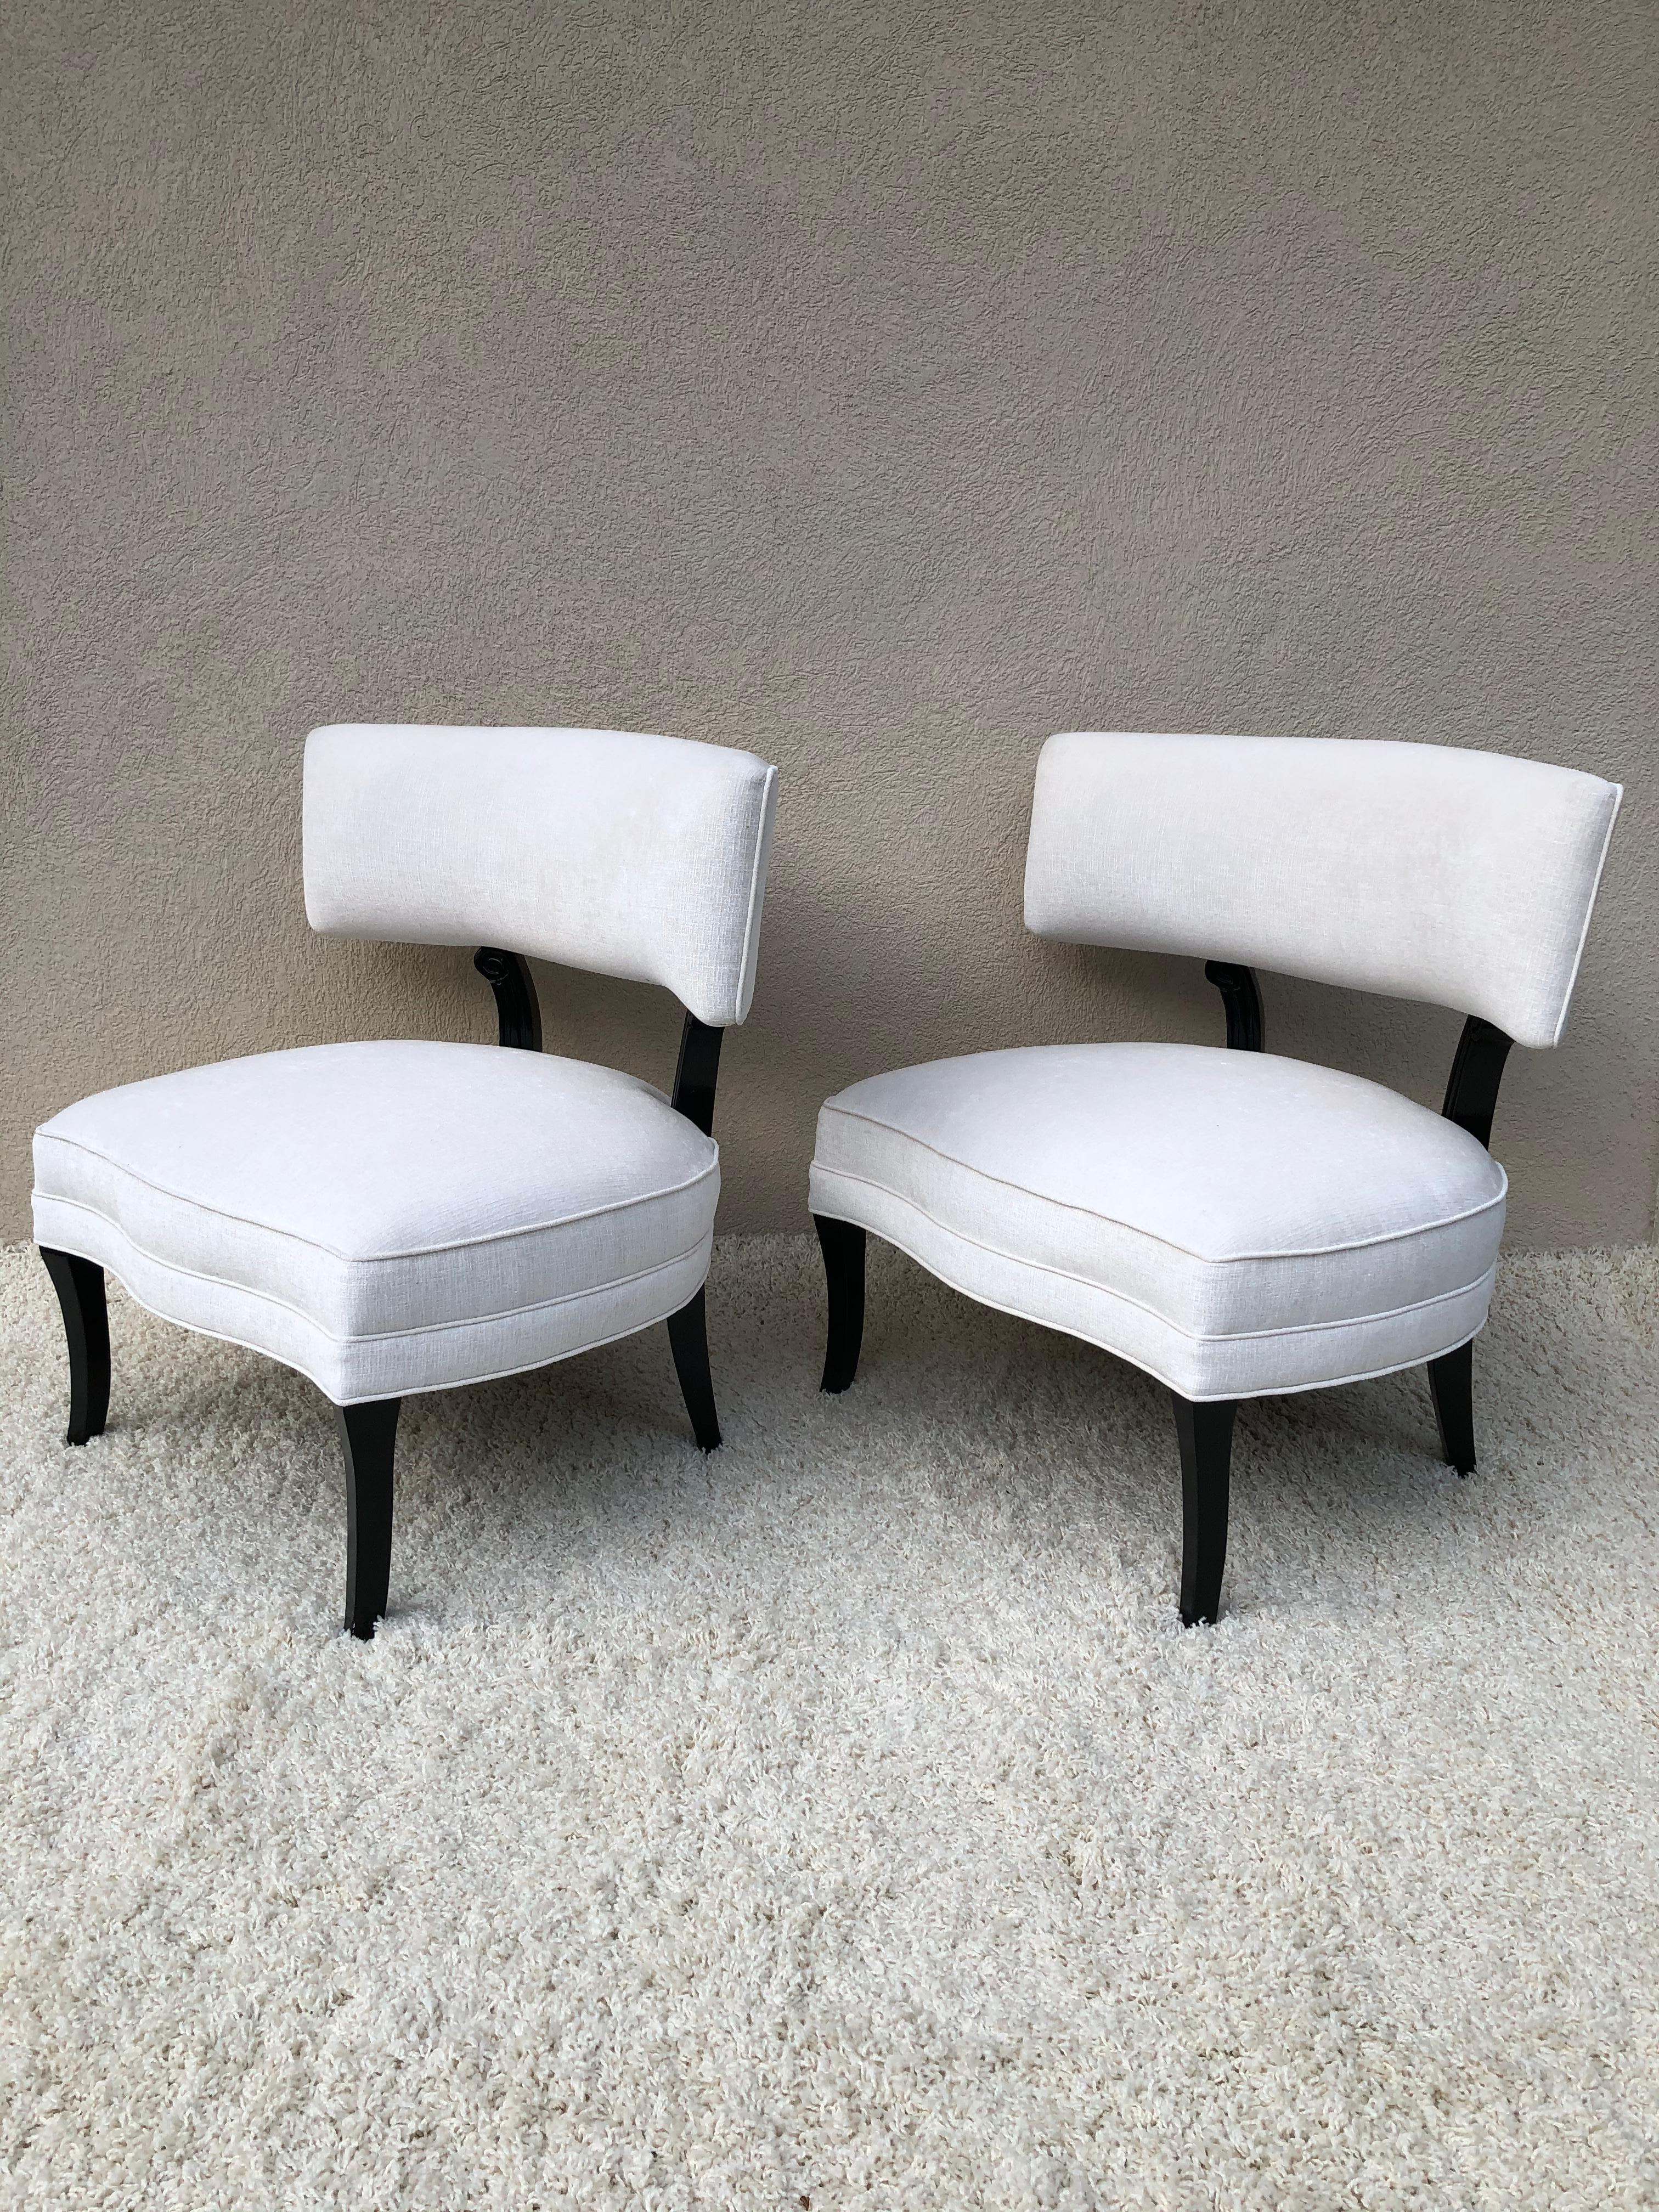 Pair of Billy Haines style elegant club chairs, curved back and black lacquer legs and detail, in an off-white chenille, several designers copied this chair, Grosfeld House made a version and James Mont also, they are unsigned and in excellent